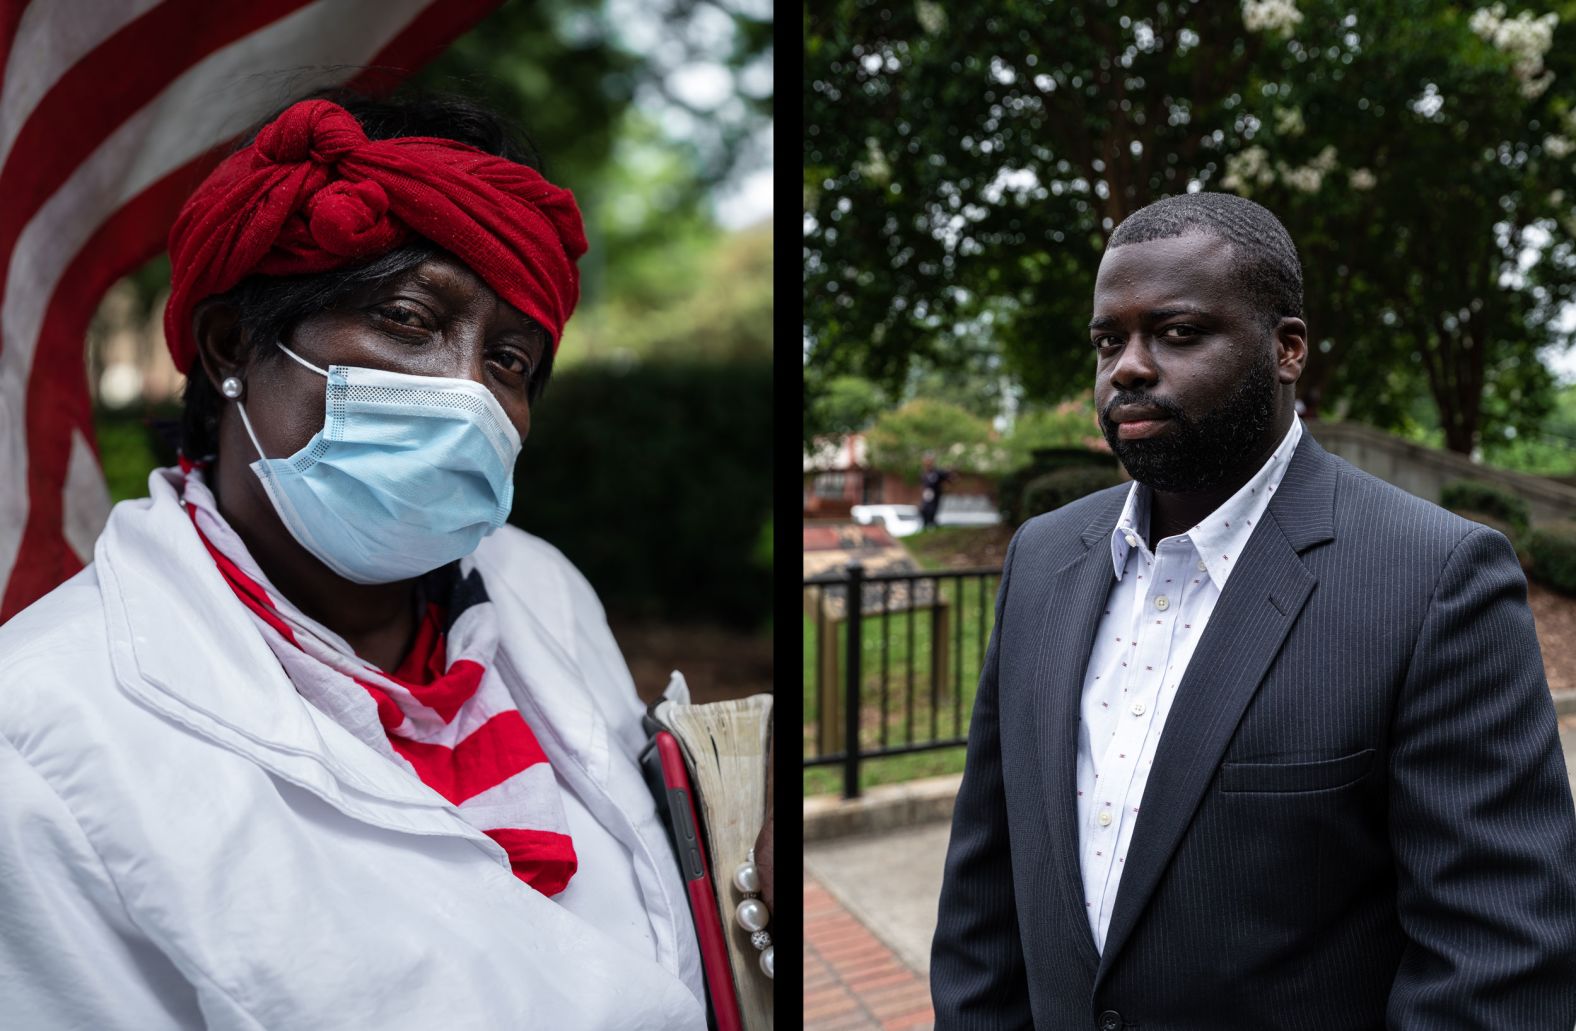 "We old people have got to stand up for the young generation," Missionary G.A. Breedlove, left, told photographer Joshua Rashaad McFadden on Tuesday. "They're out there marching. We can't march. But we can support them with our voices and show up and speak! ... We're all God's people, and justice is for all of us."<br /><br />Quinton Davis, right, came out Tuesday "to support the movement for Black lives, Rayshard Brooks, and to show how important it is to support each other. I'm tired of hearing about unarmed Black men being killed. We must reimagine what public safety is."